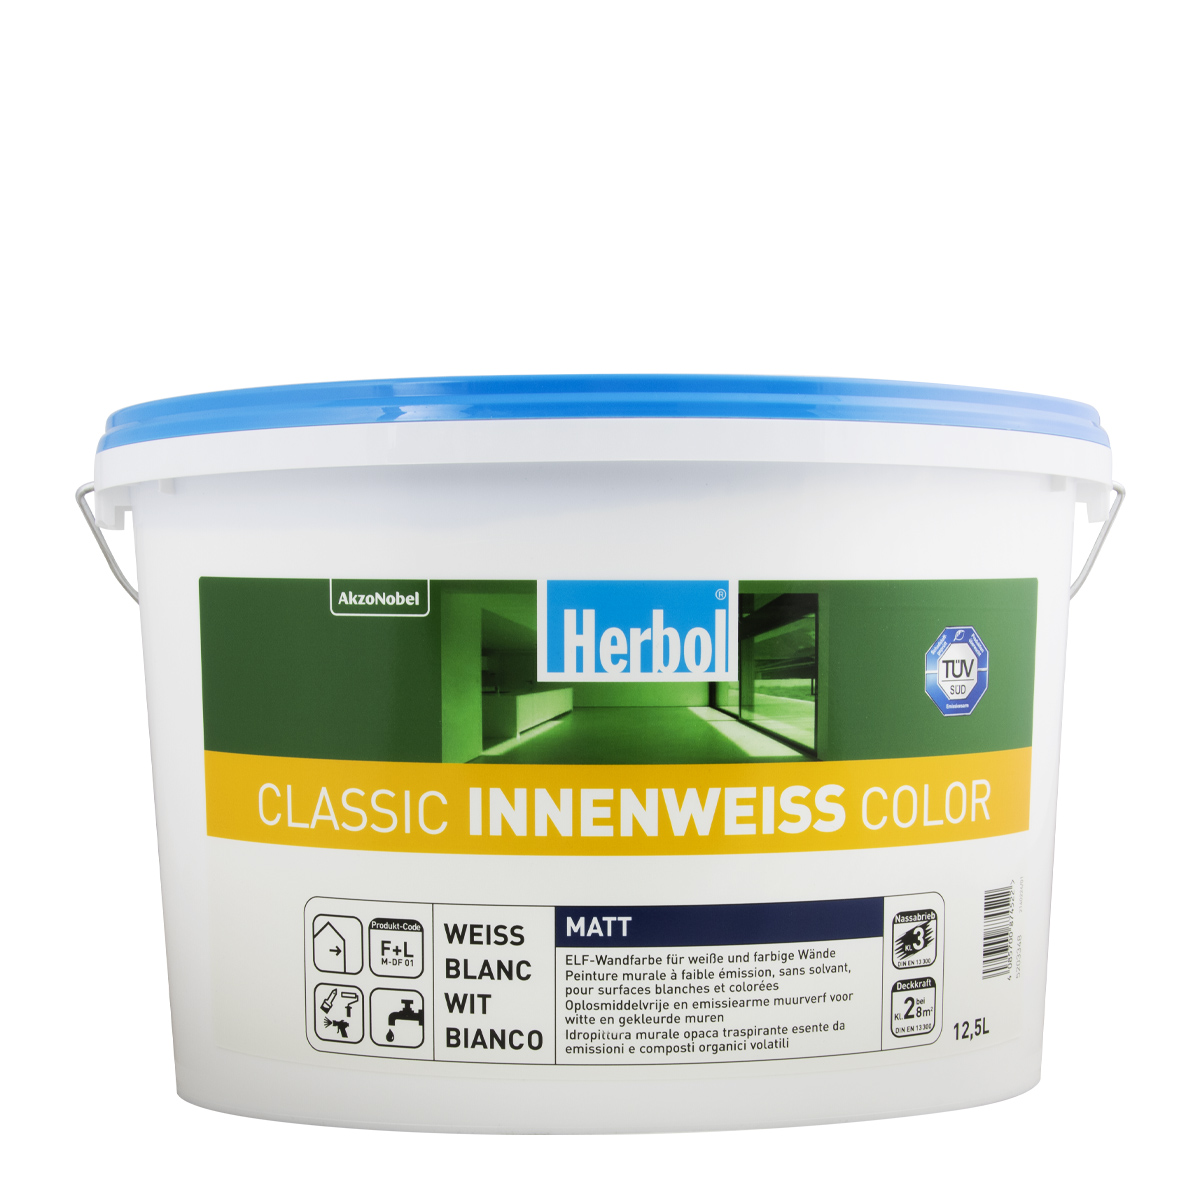 Herbol Classic Innenweiss Color 12,5L weiss Wandfarbe